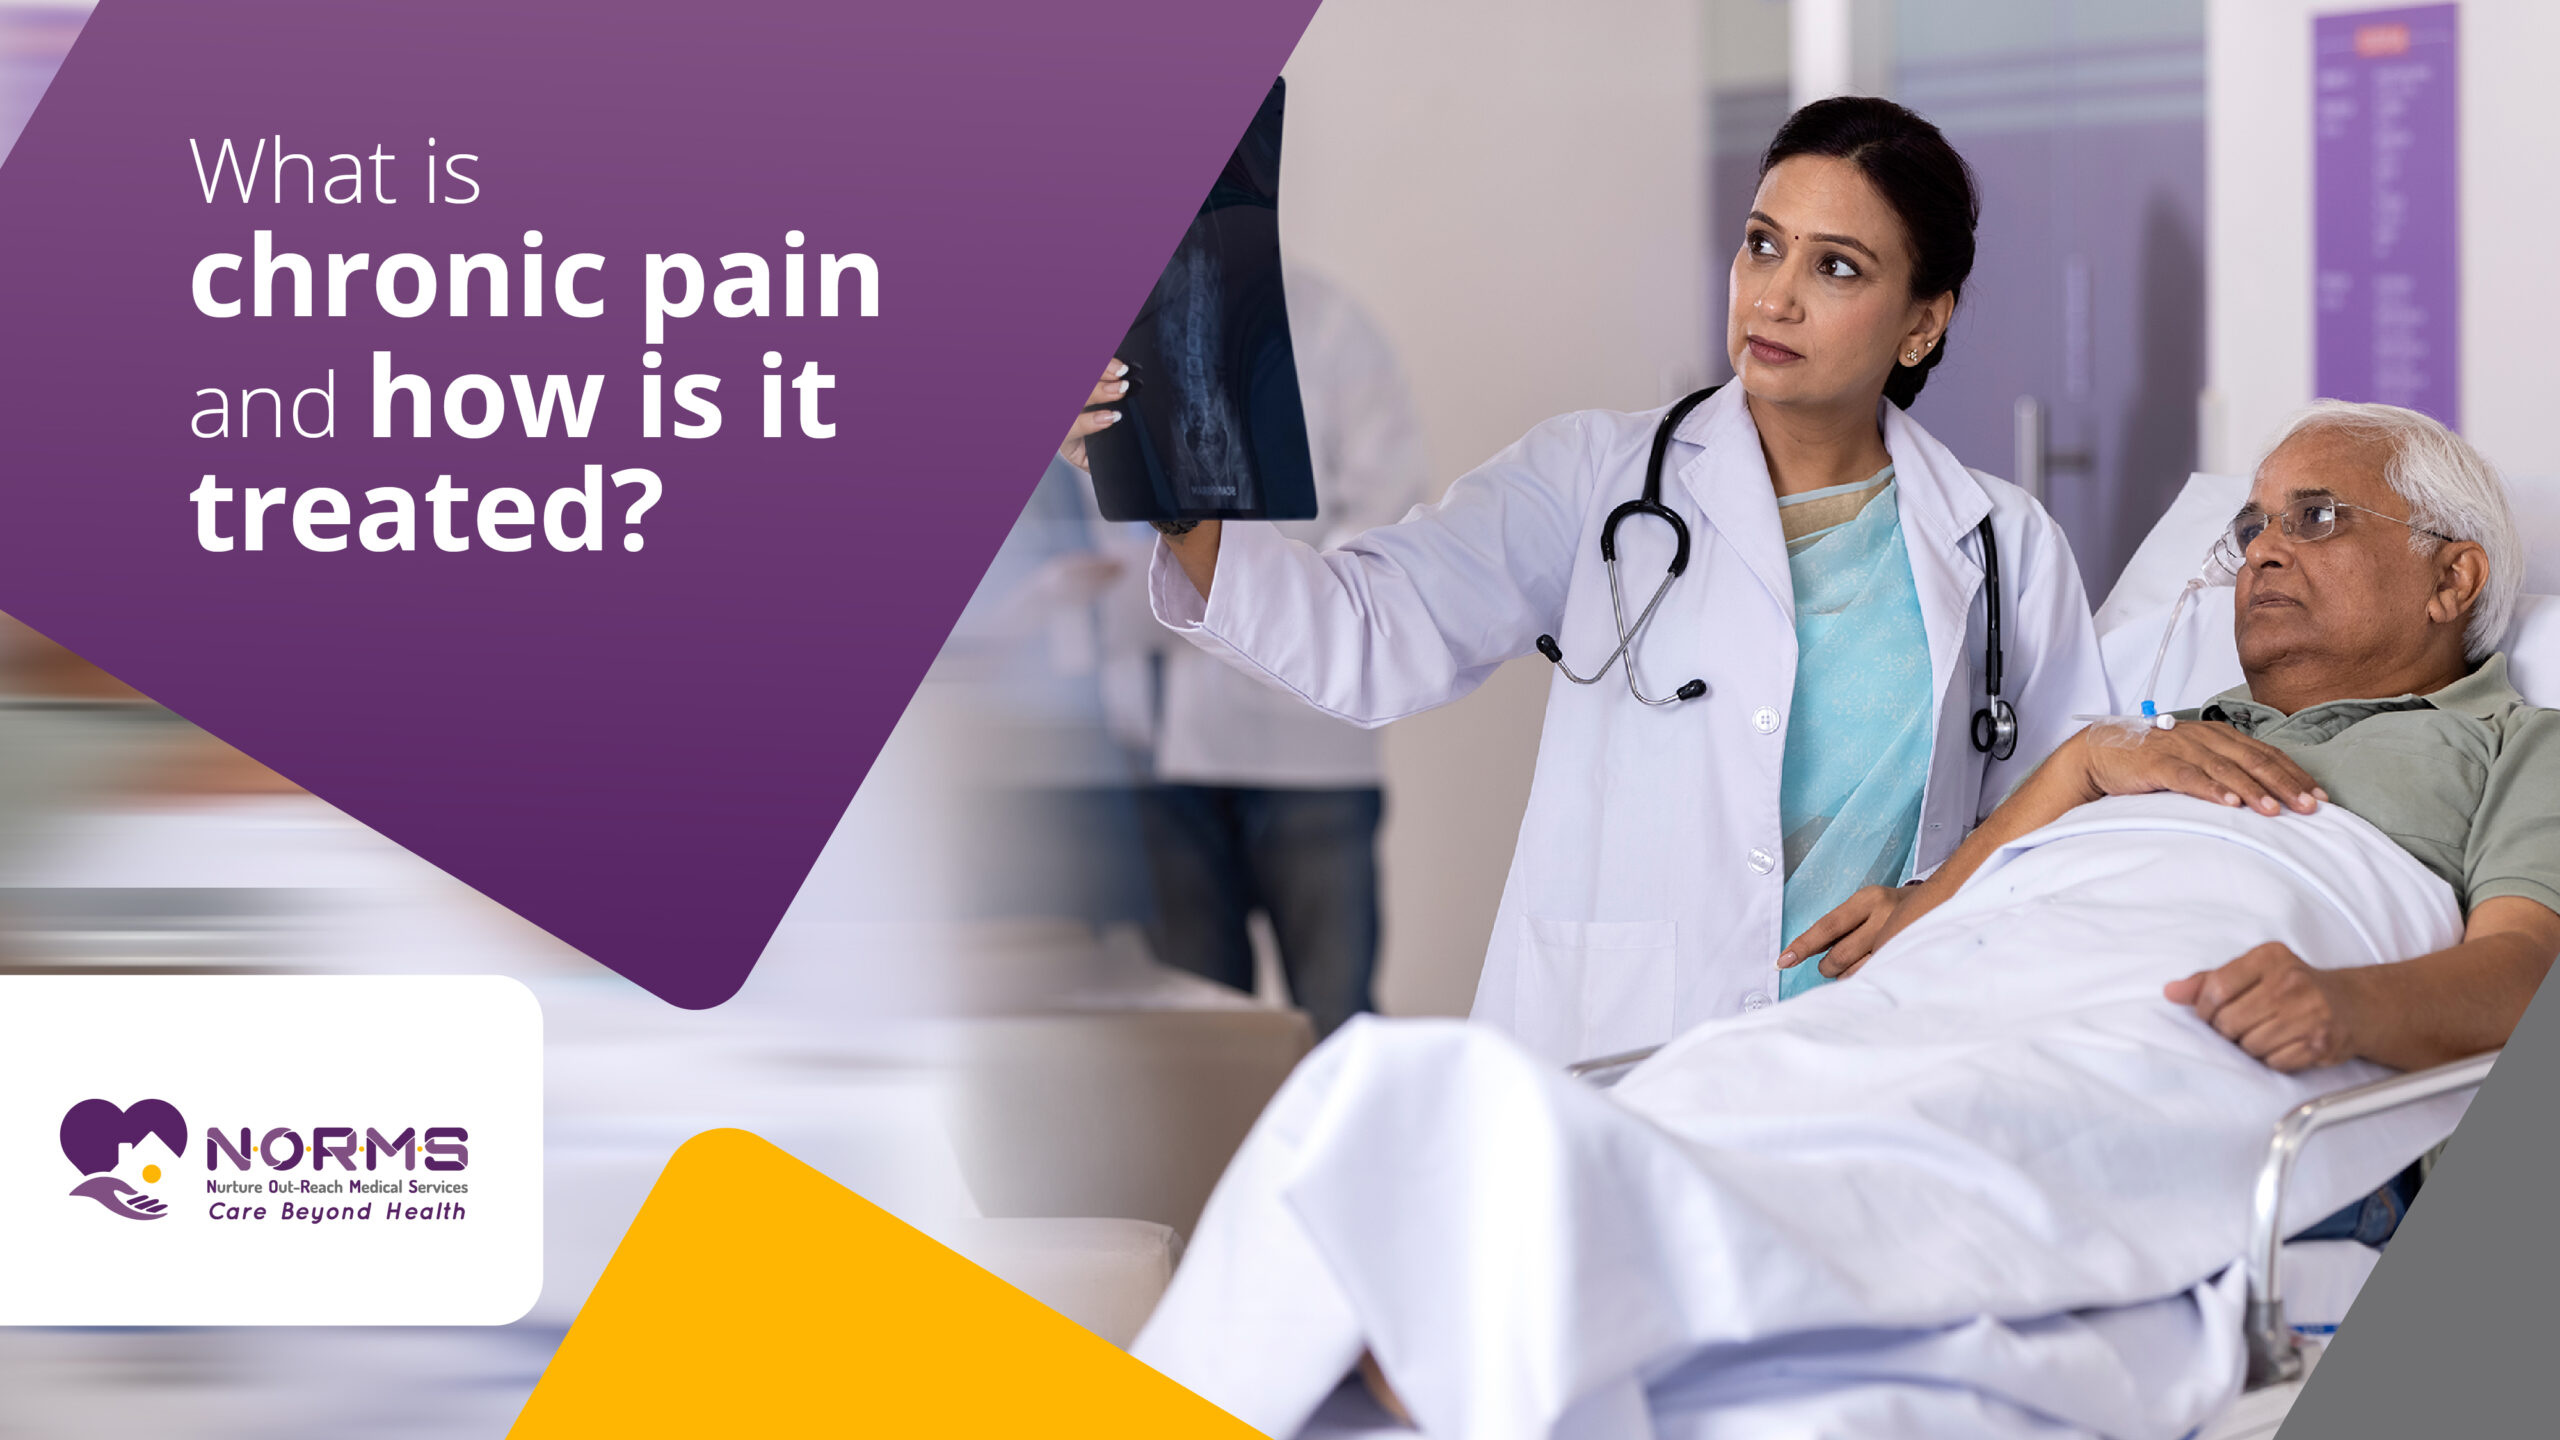 Identify the chronic pain conditions for ageing